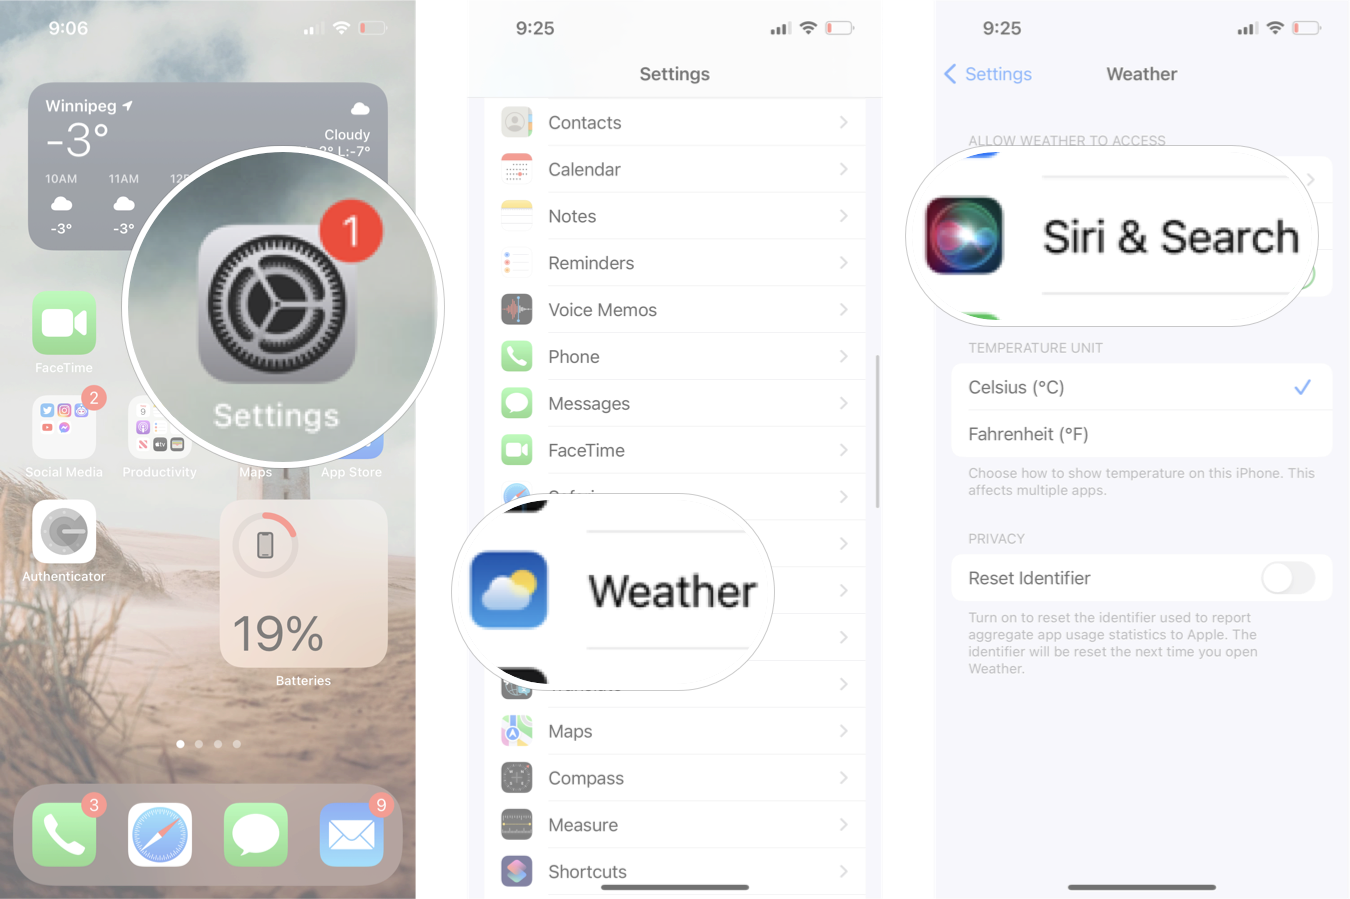 Open Siri And Search Settings For An App In iOS 15: Launch Settings, tap the app you want, and then tap Siri & Search.